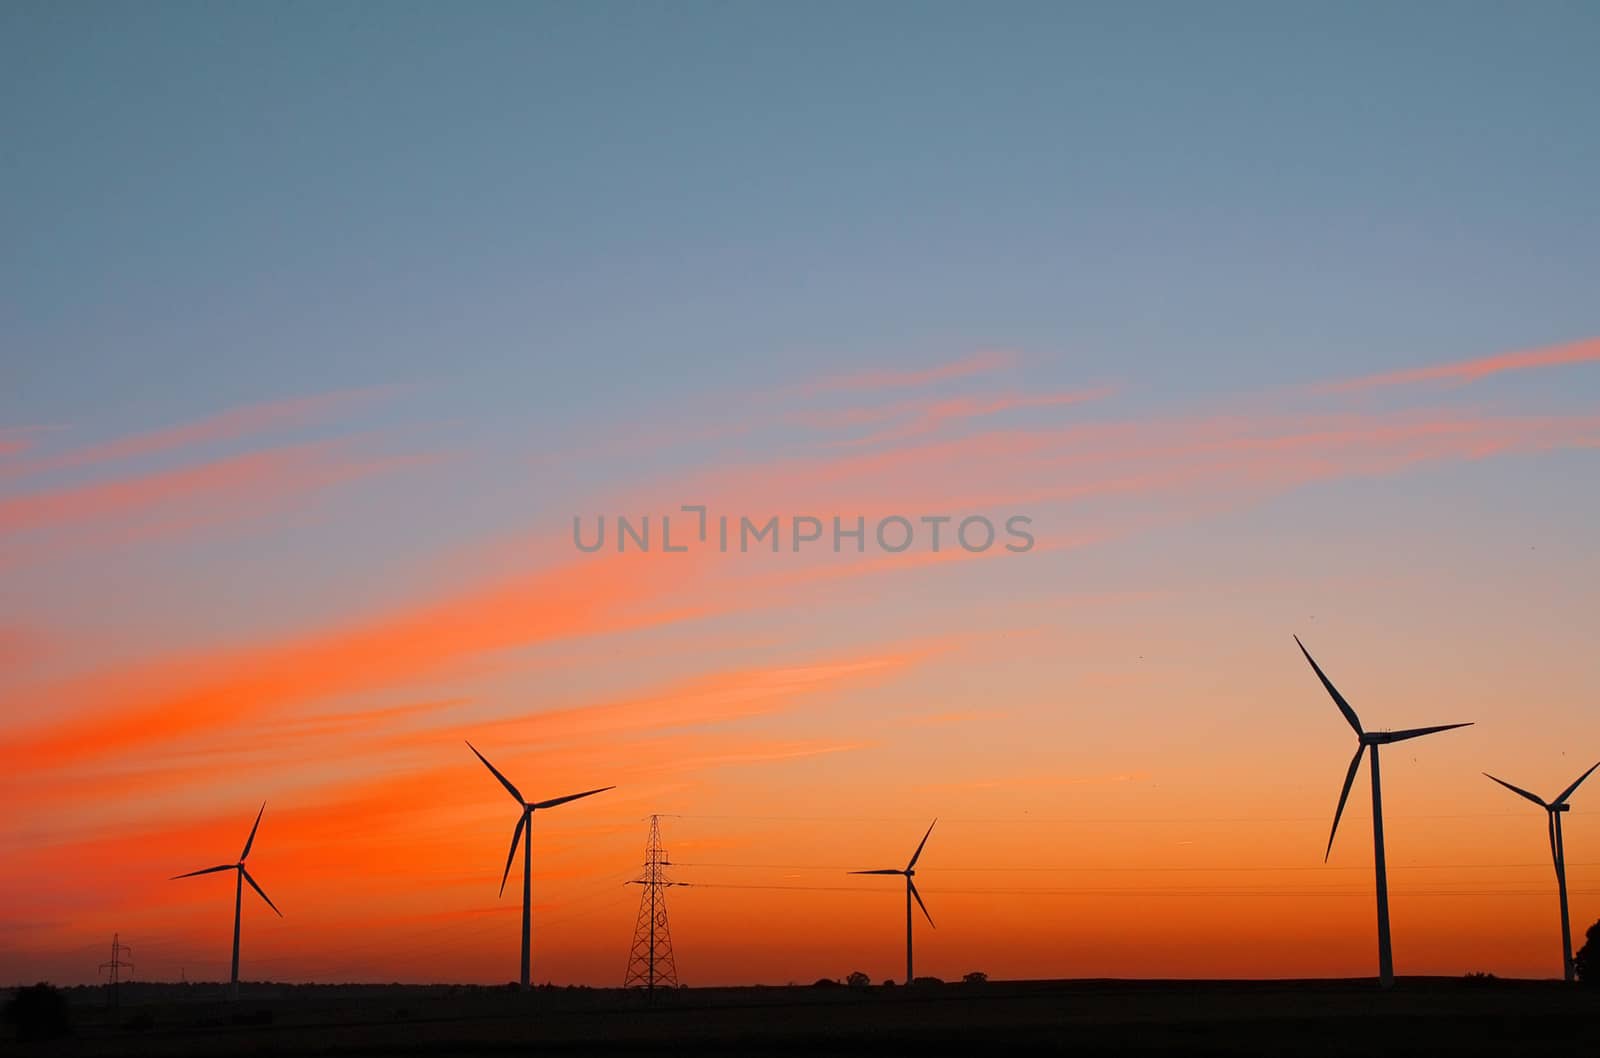 Wind electric power plant by Vectorex